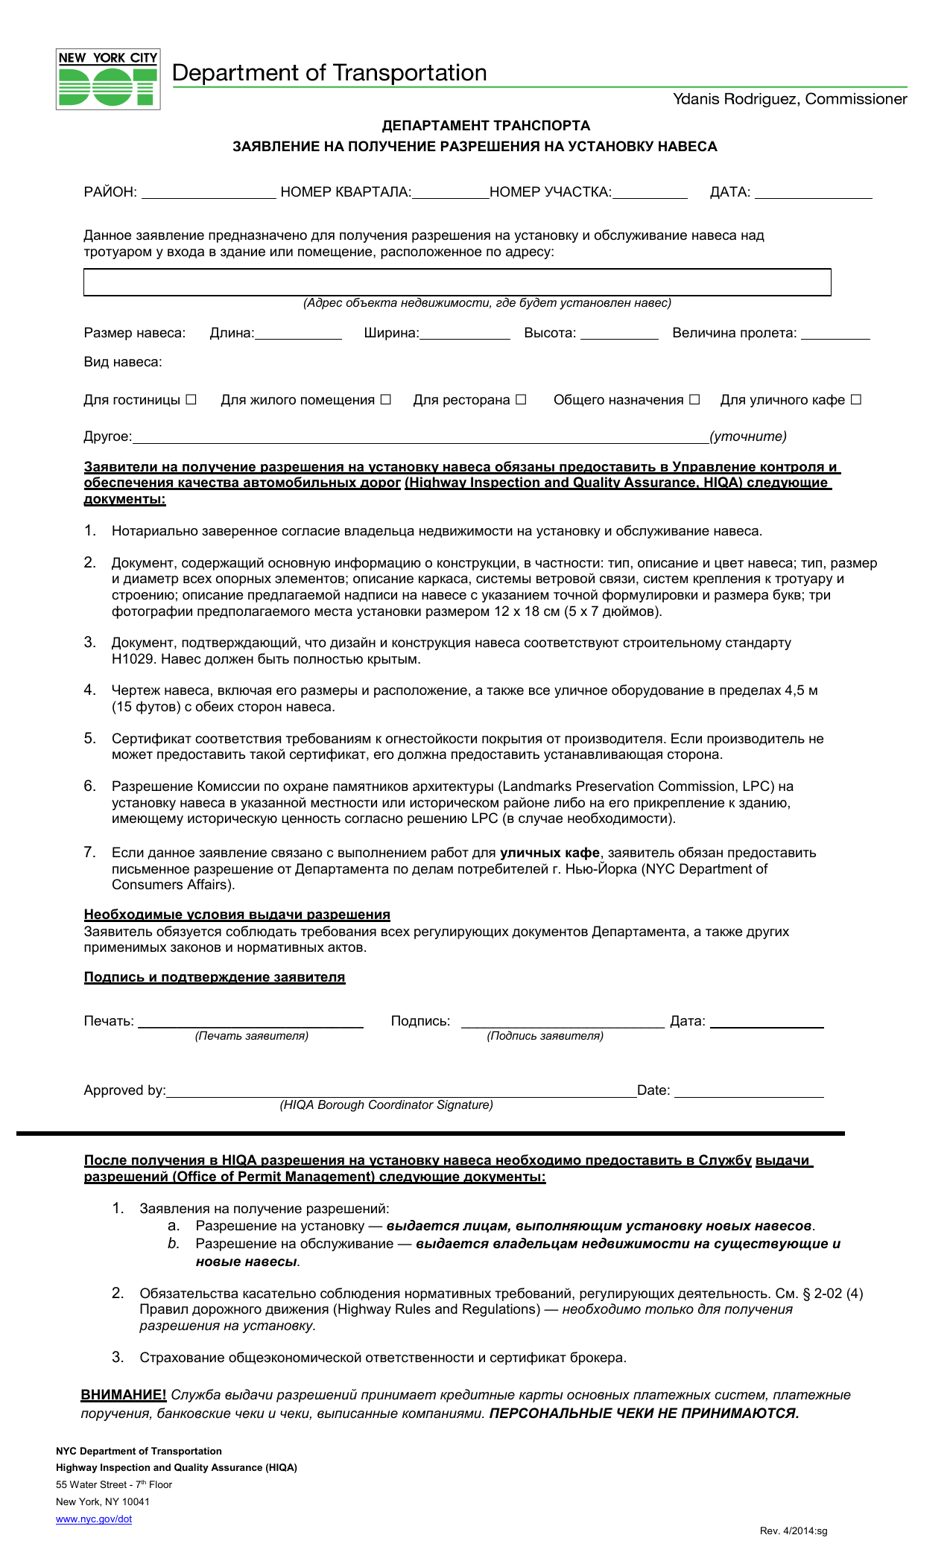 Canopy Authorization Application - New York City (Russian), Page 1